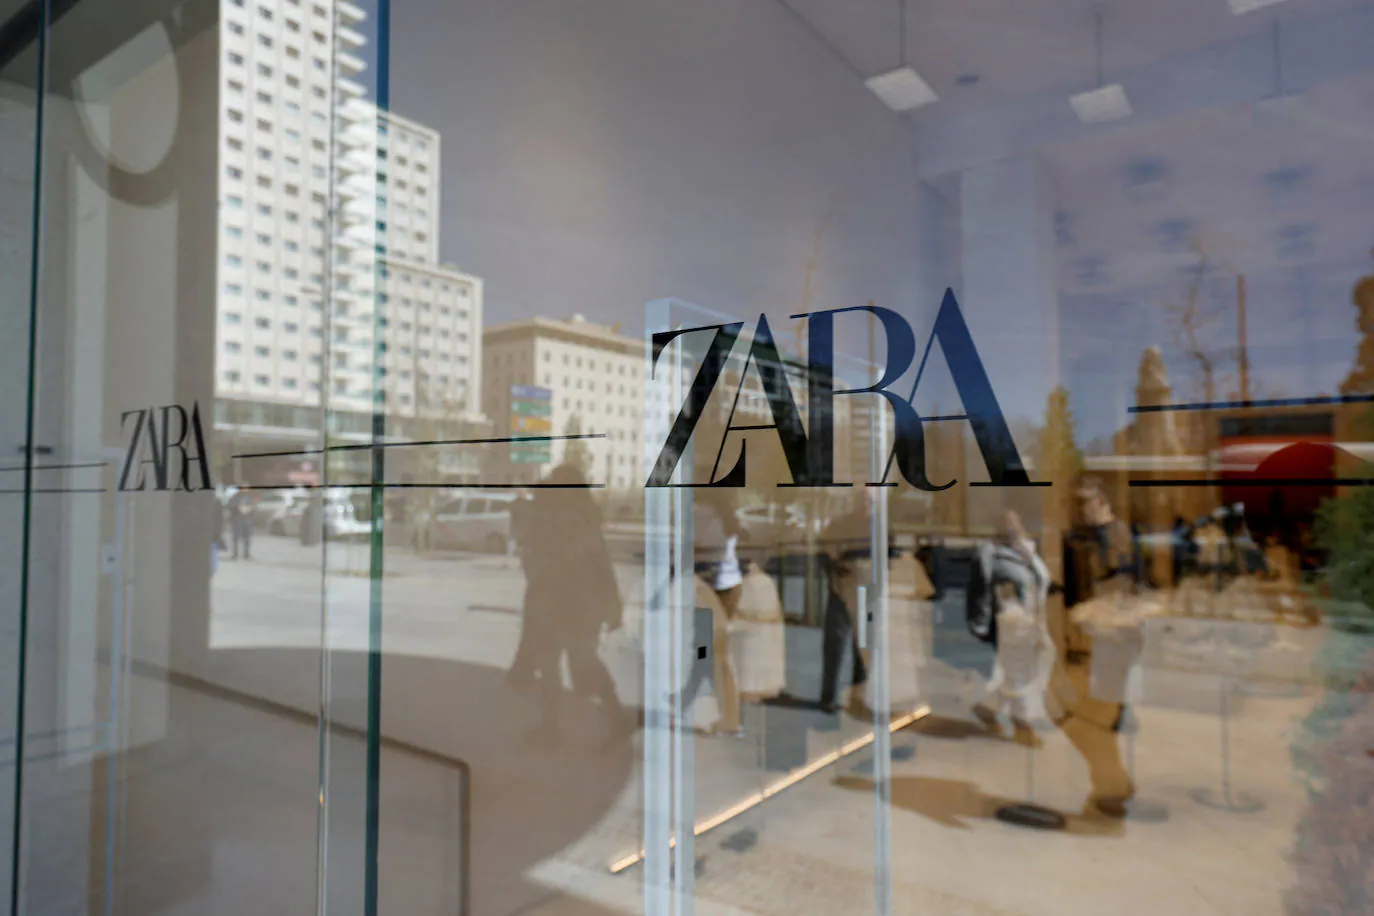 Spanish firm that owns Zara announces record sales for 2022 and surge in profits